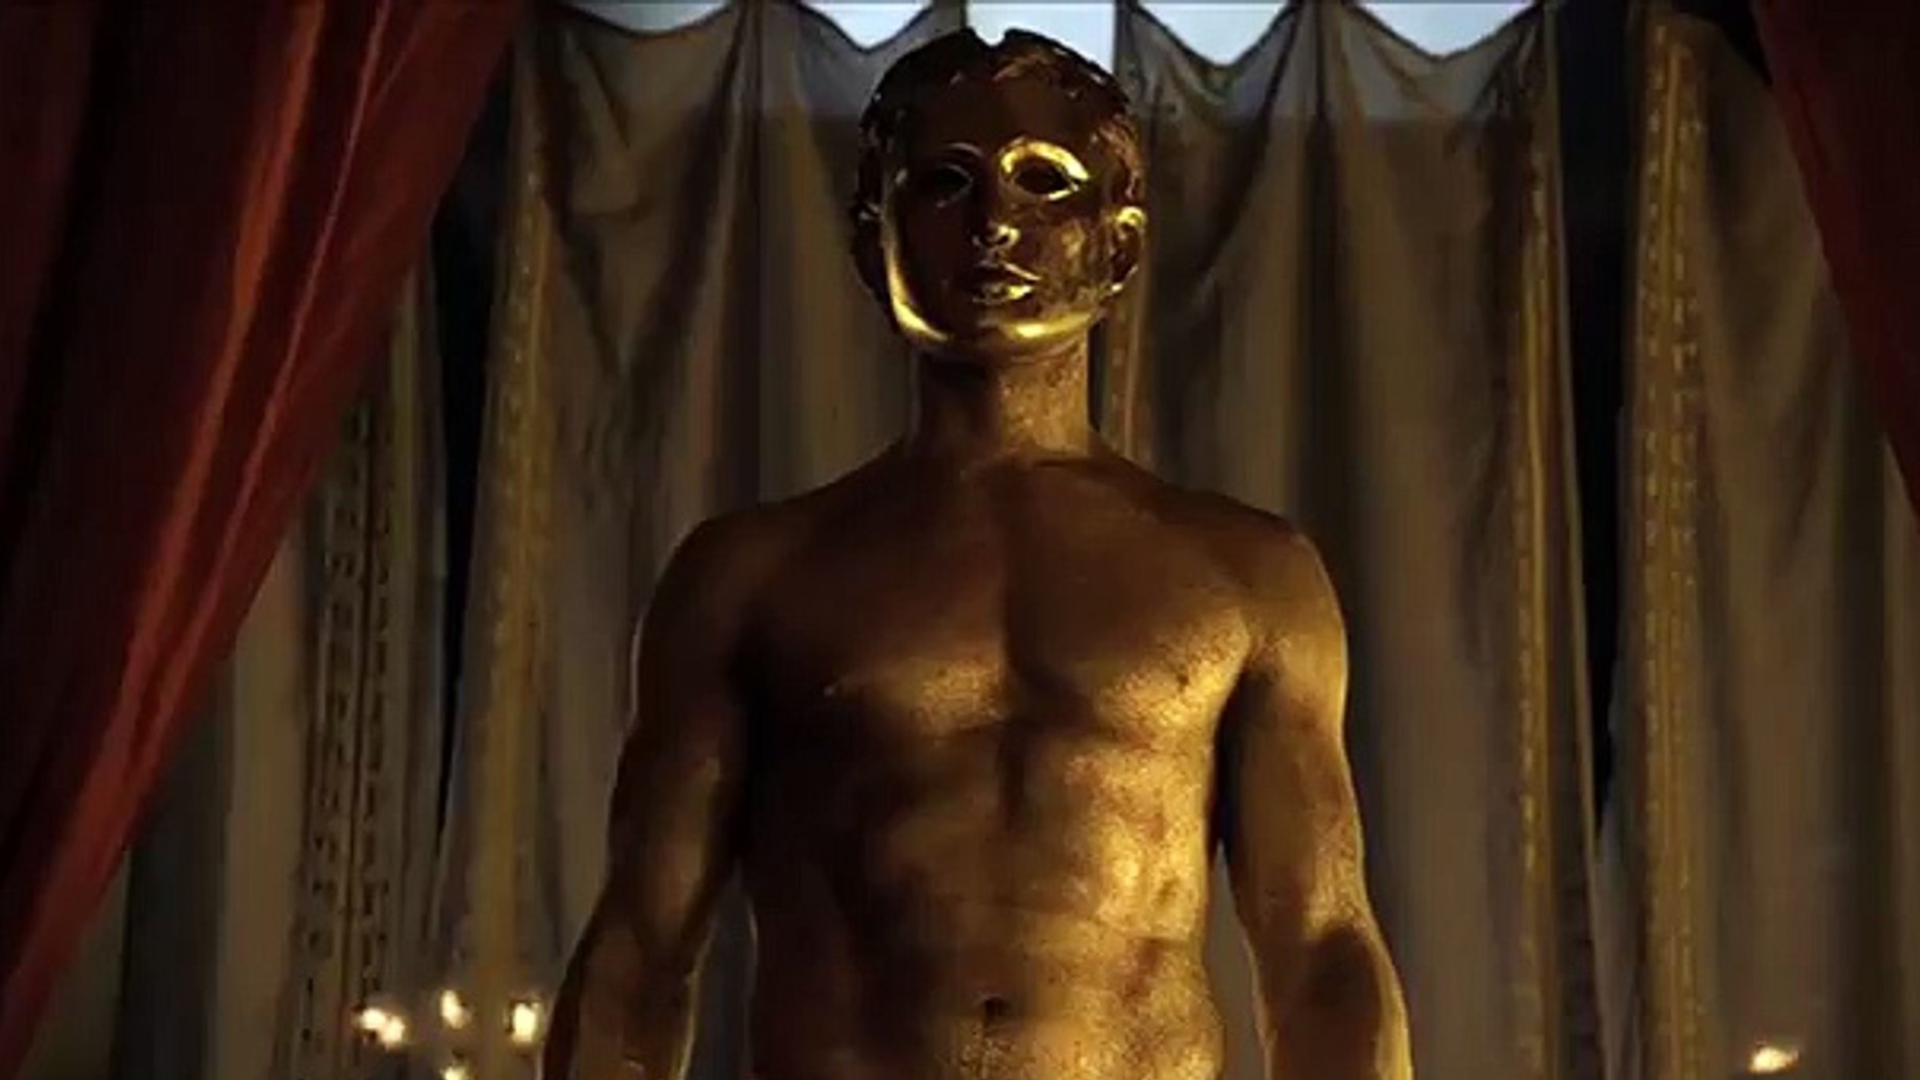 A top less man with gold glitters on skin wearing a golden mask